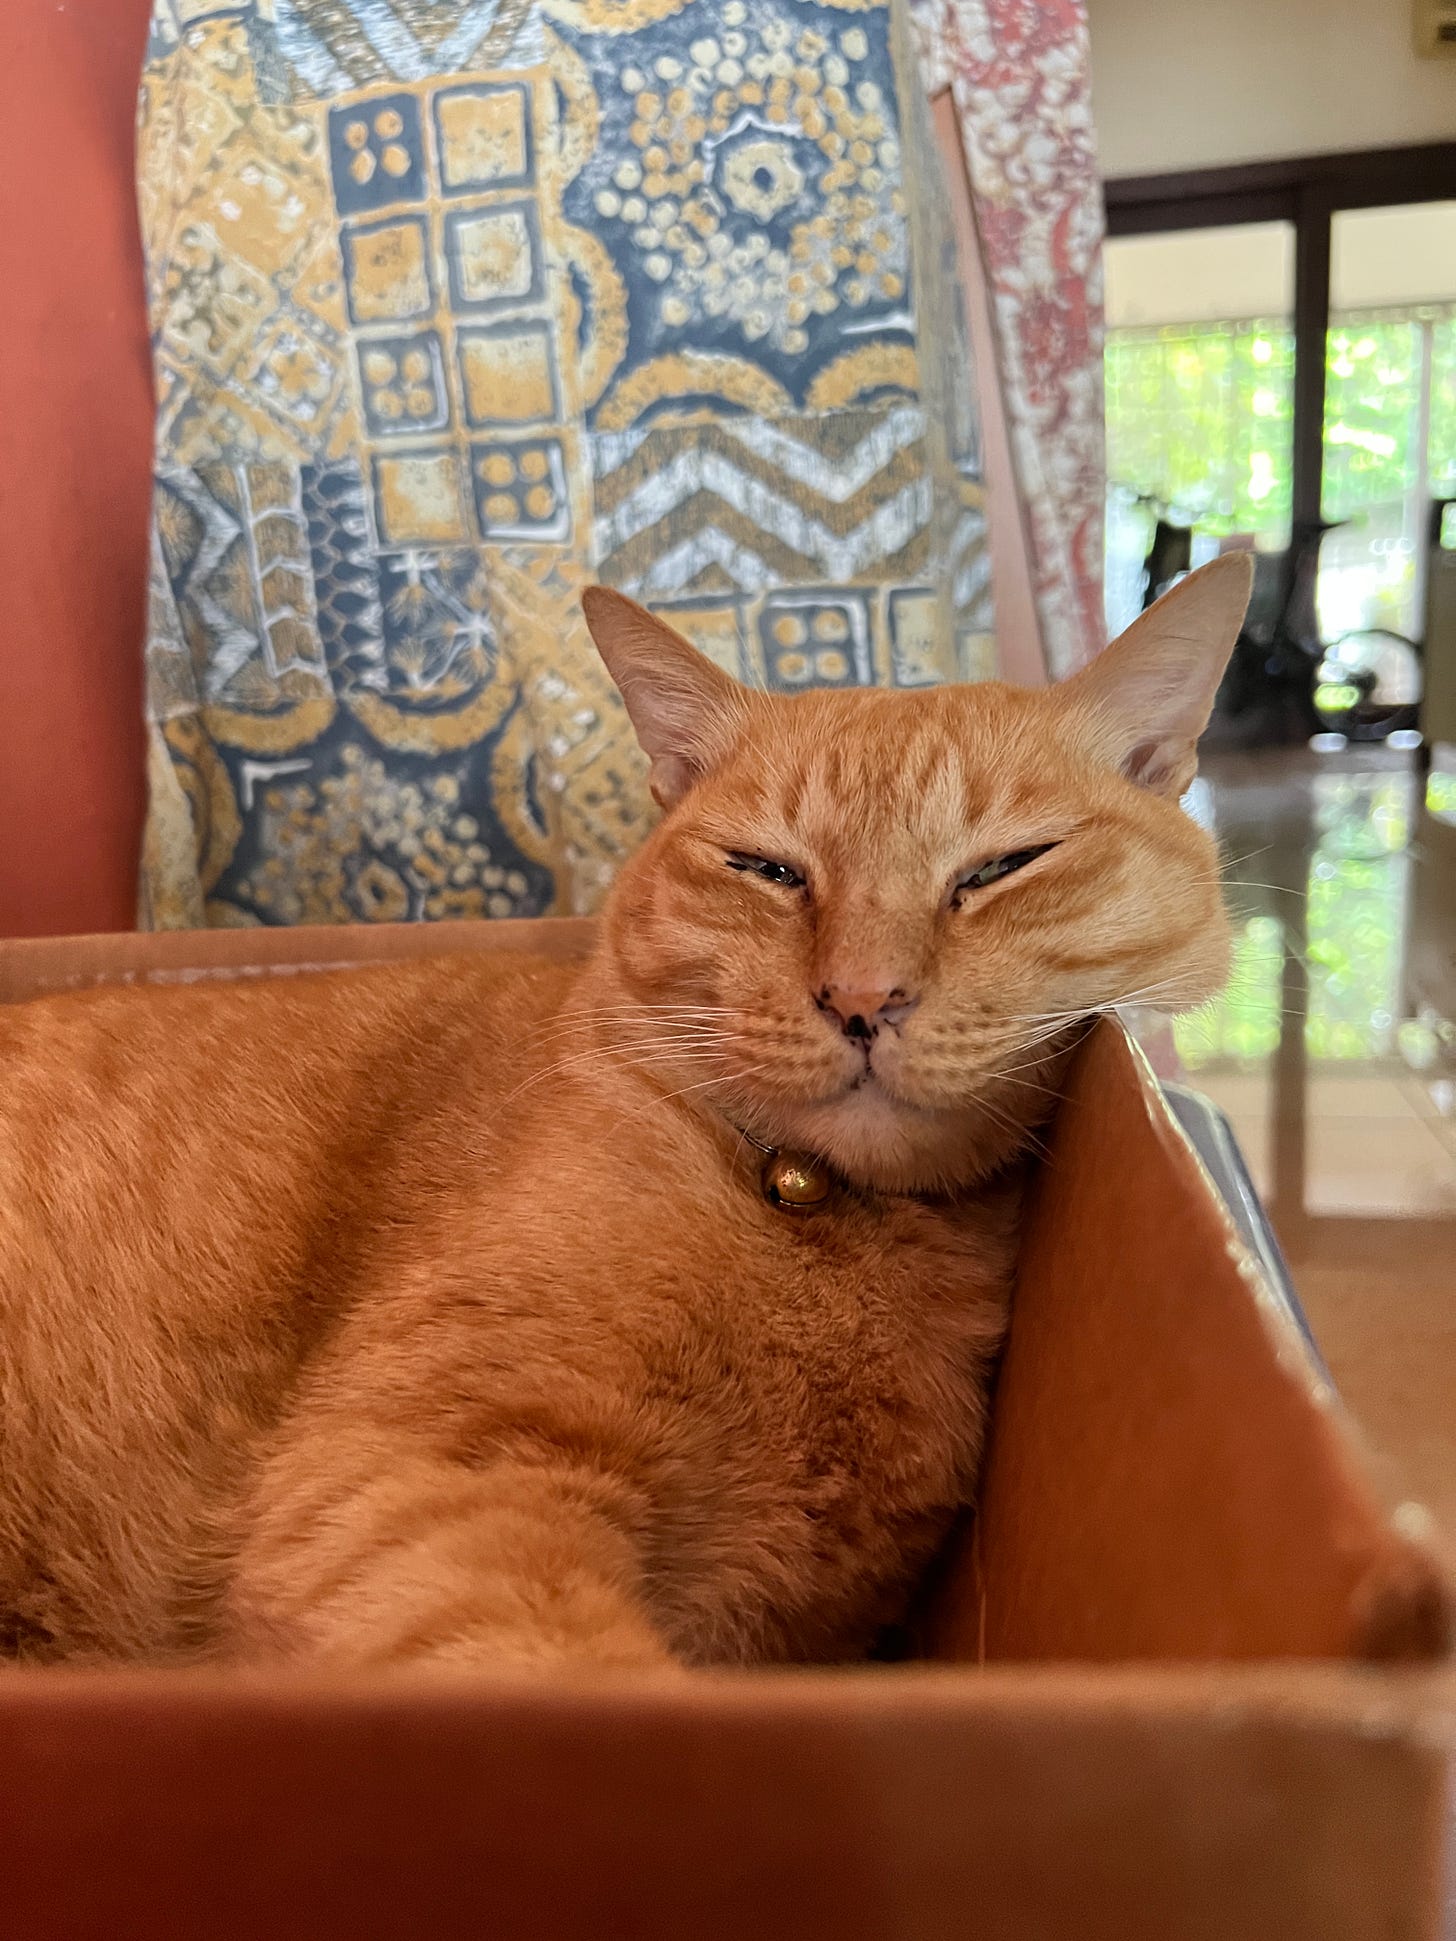 A picture of Tiger, my ginger cat, sleeping very comfortably in a cardboard box with his chubby cheek spilling over the side of the box.